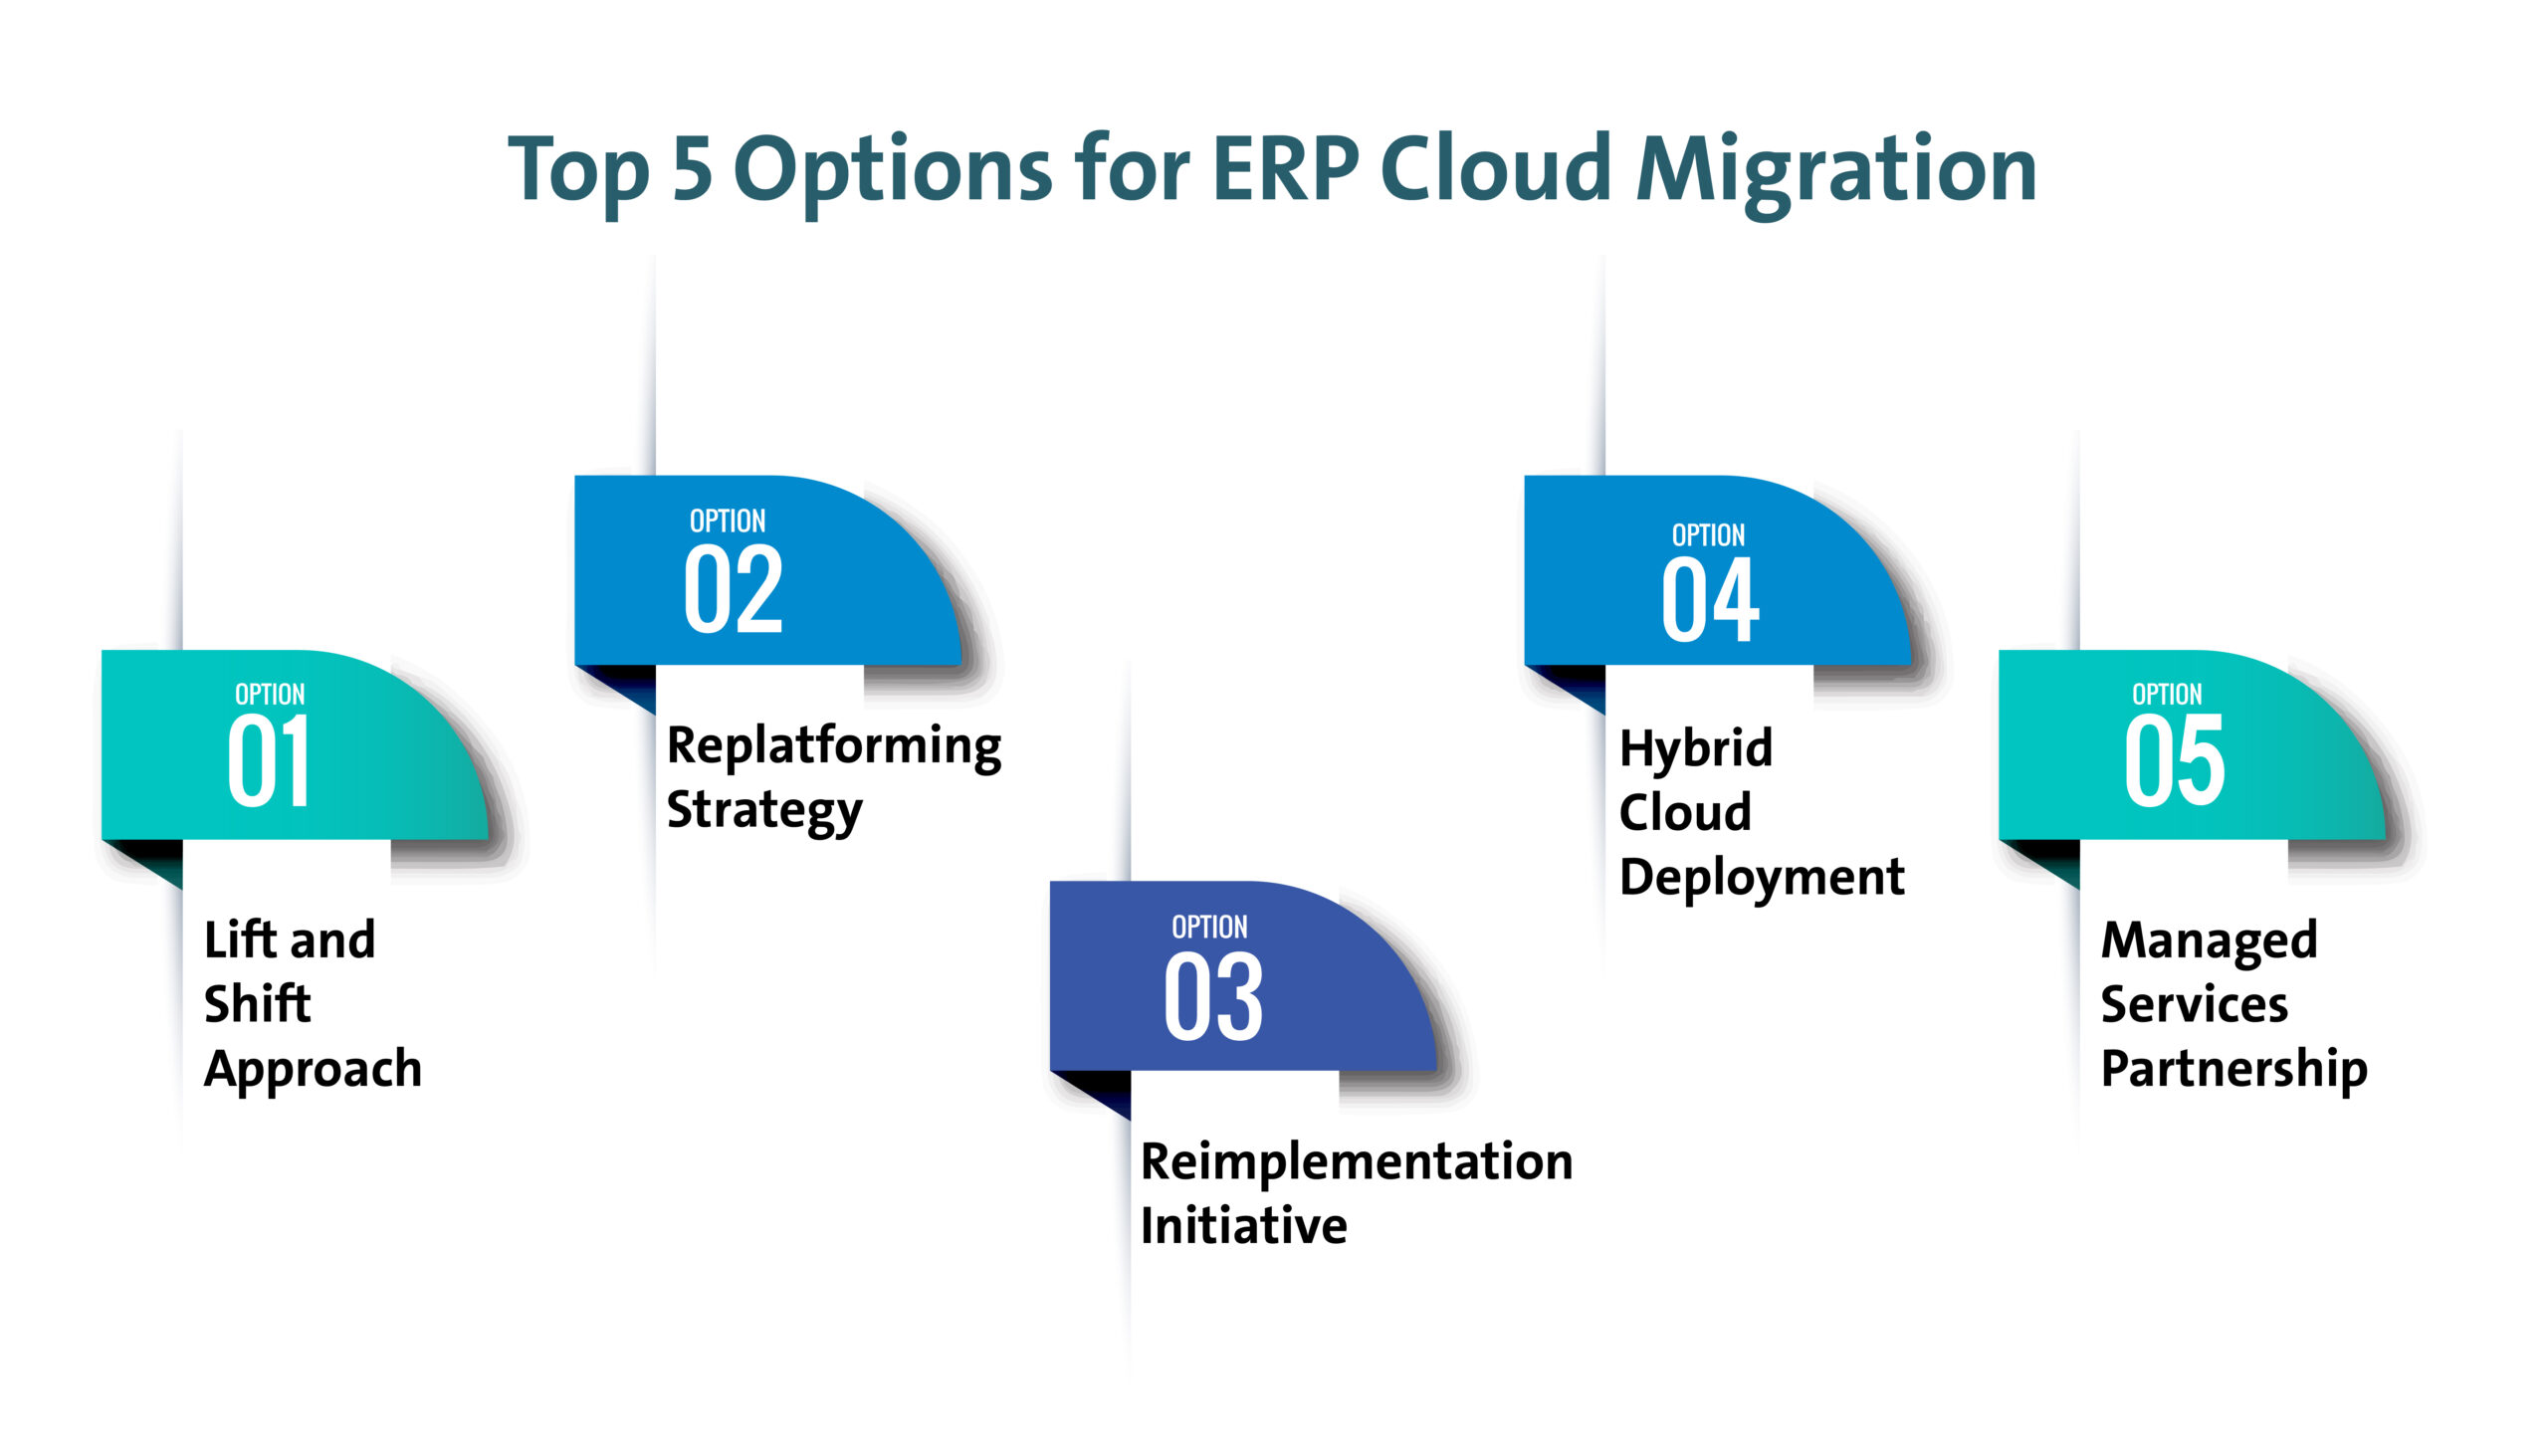 Fig 2: Top 5 Options for ERP Cloud Migration